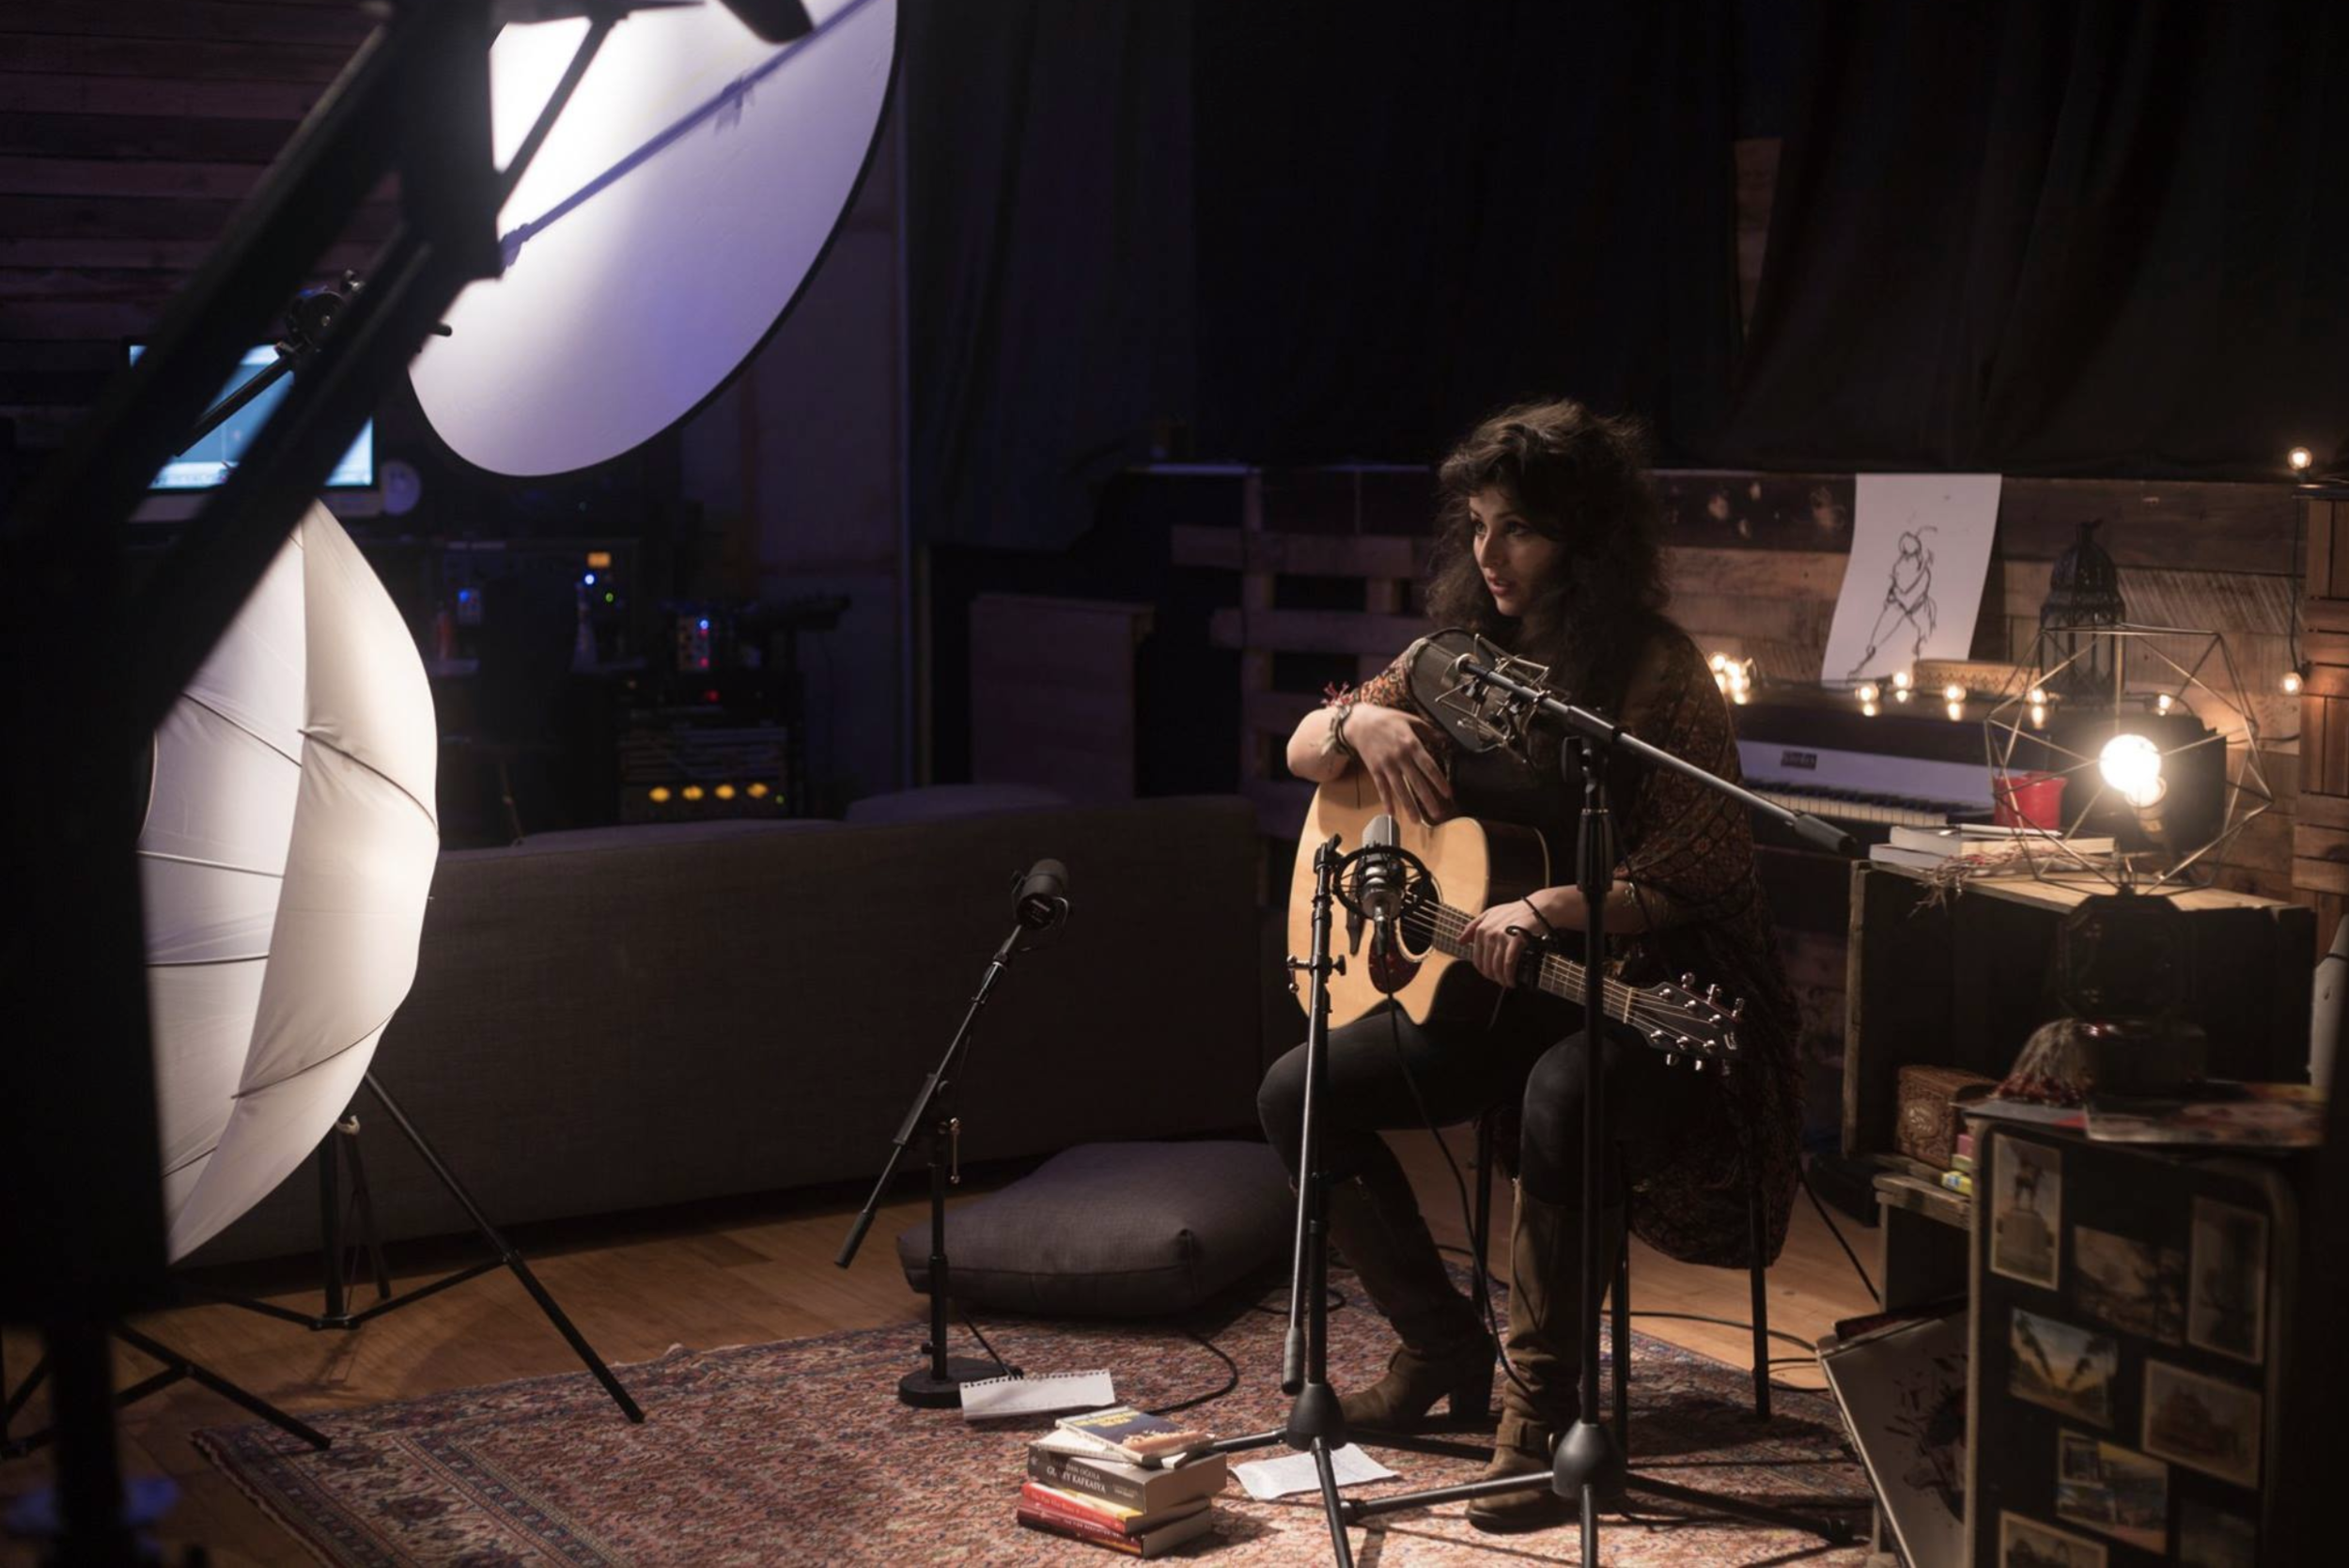 Recording and shooting the music video for "Anasozu" for the upcoming full length album at Studio 42, Brooklyn